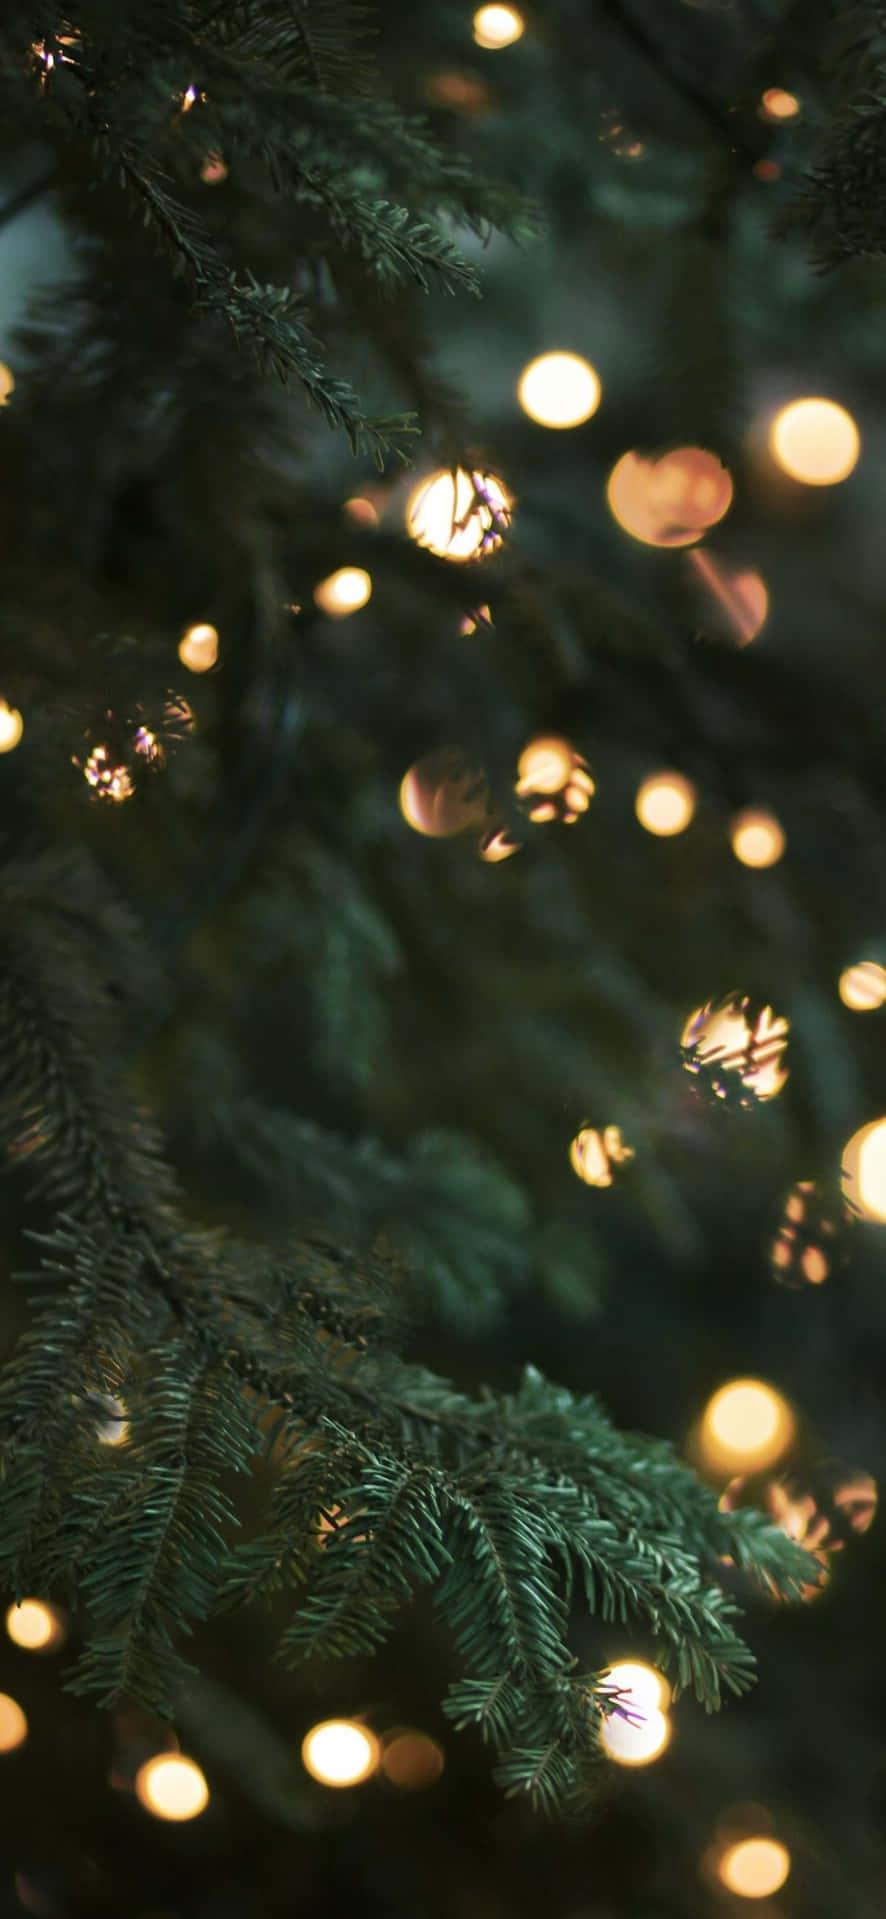 Download Capture the festive spirit with this beautiful Christmas